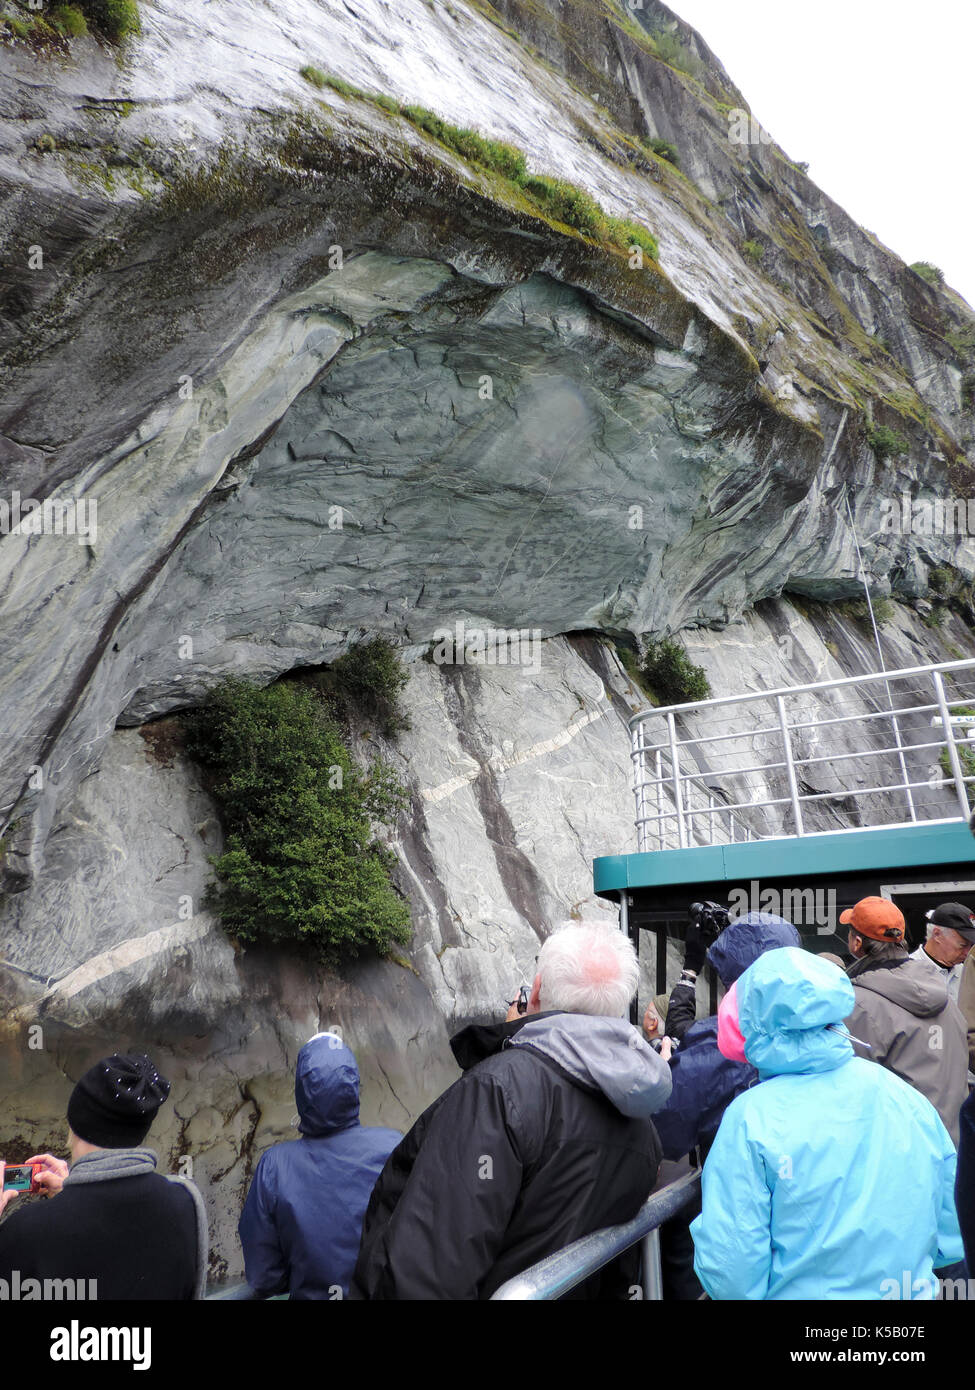 TOUR SHOWING SMOOTH CLIFFS FROM GLACIAL MOVEMENT, ALASKA Stock Photo